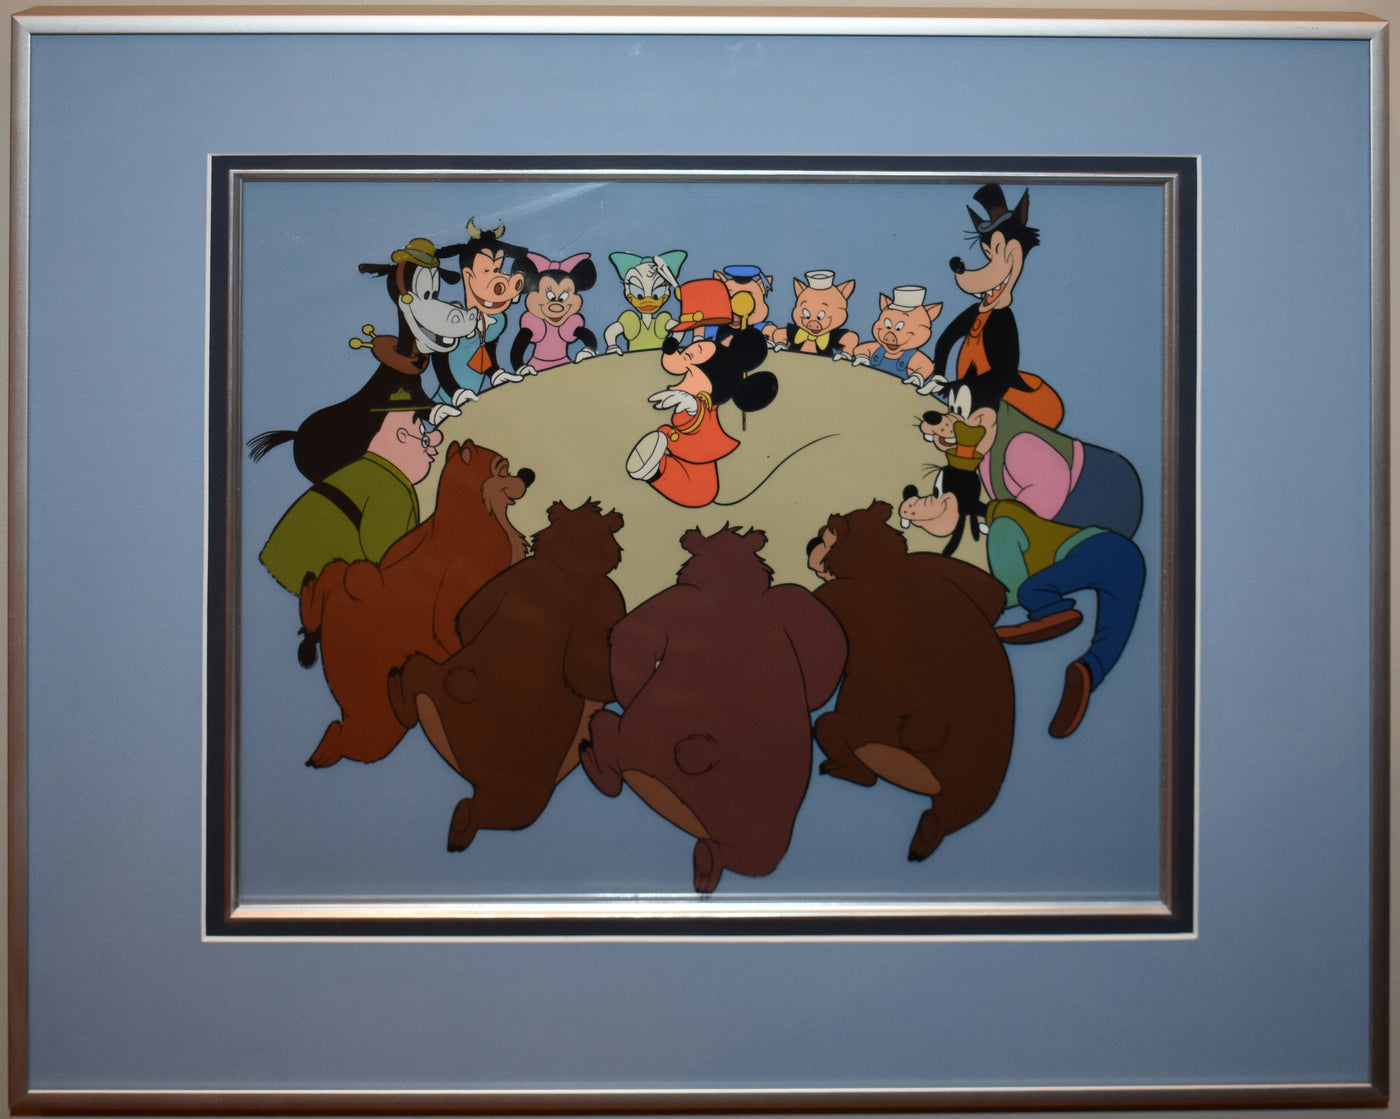 Original Walt Disney Television Production Cels from the Mickey Mouse Club (1955)